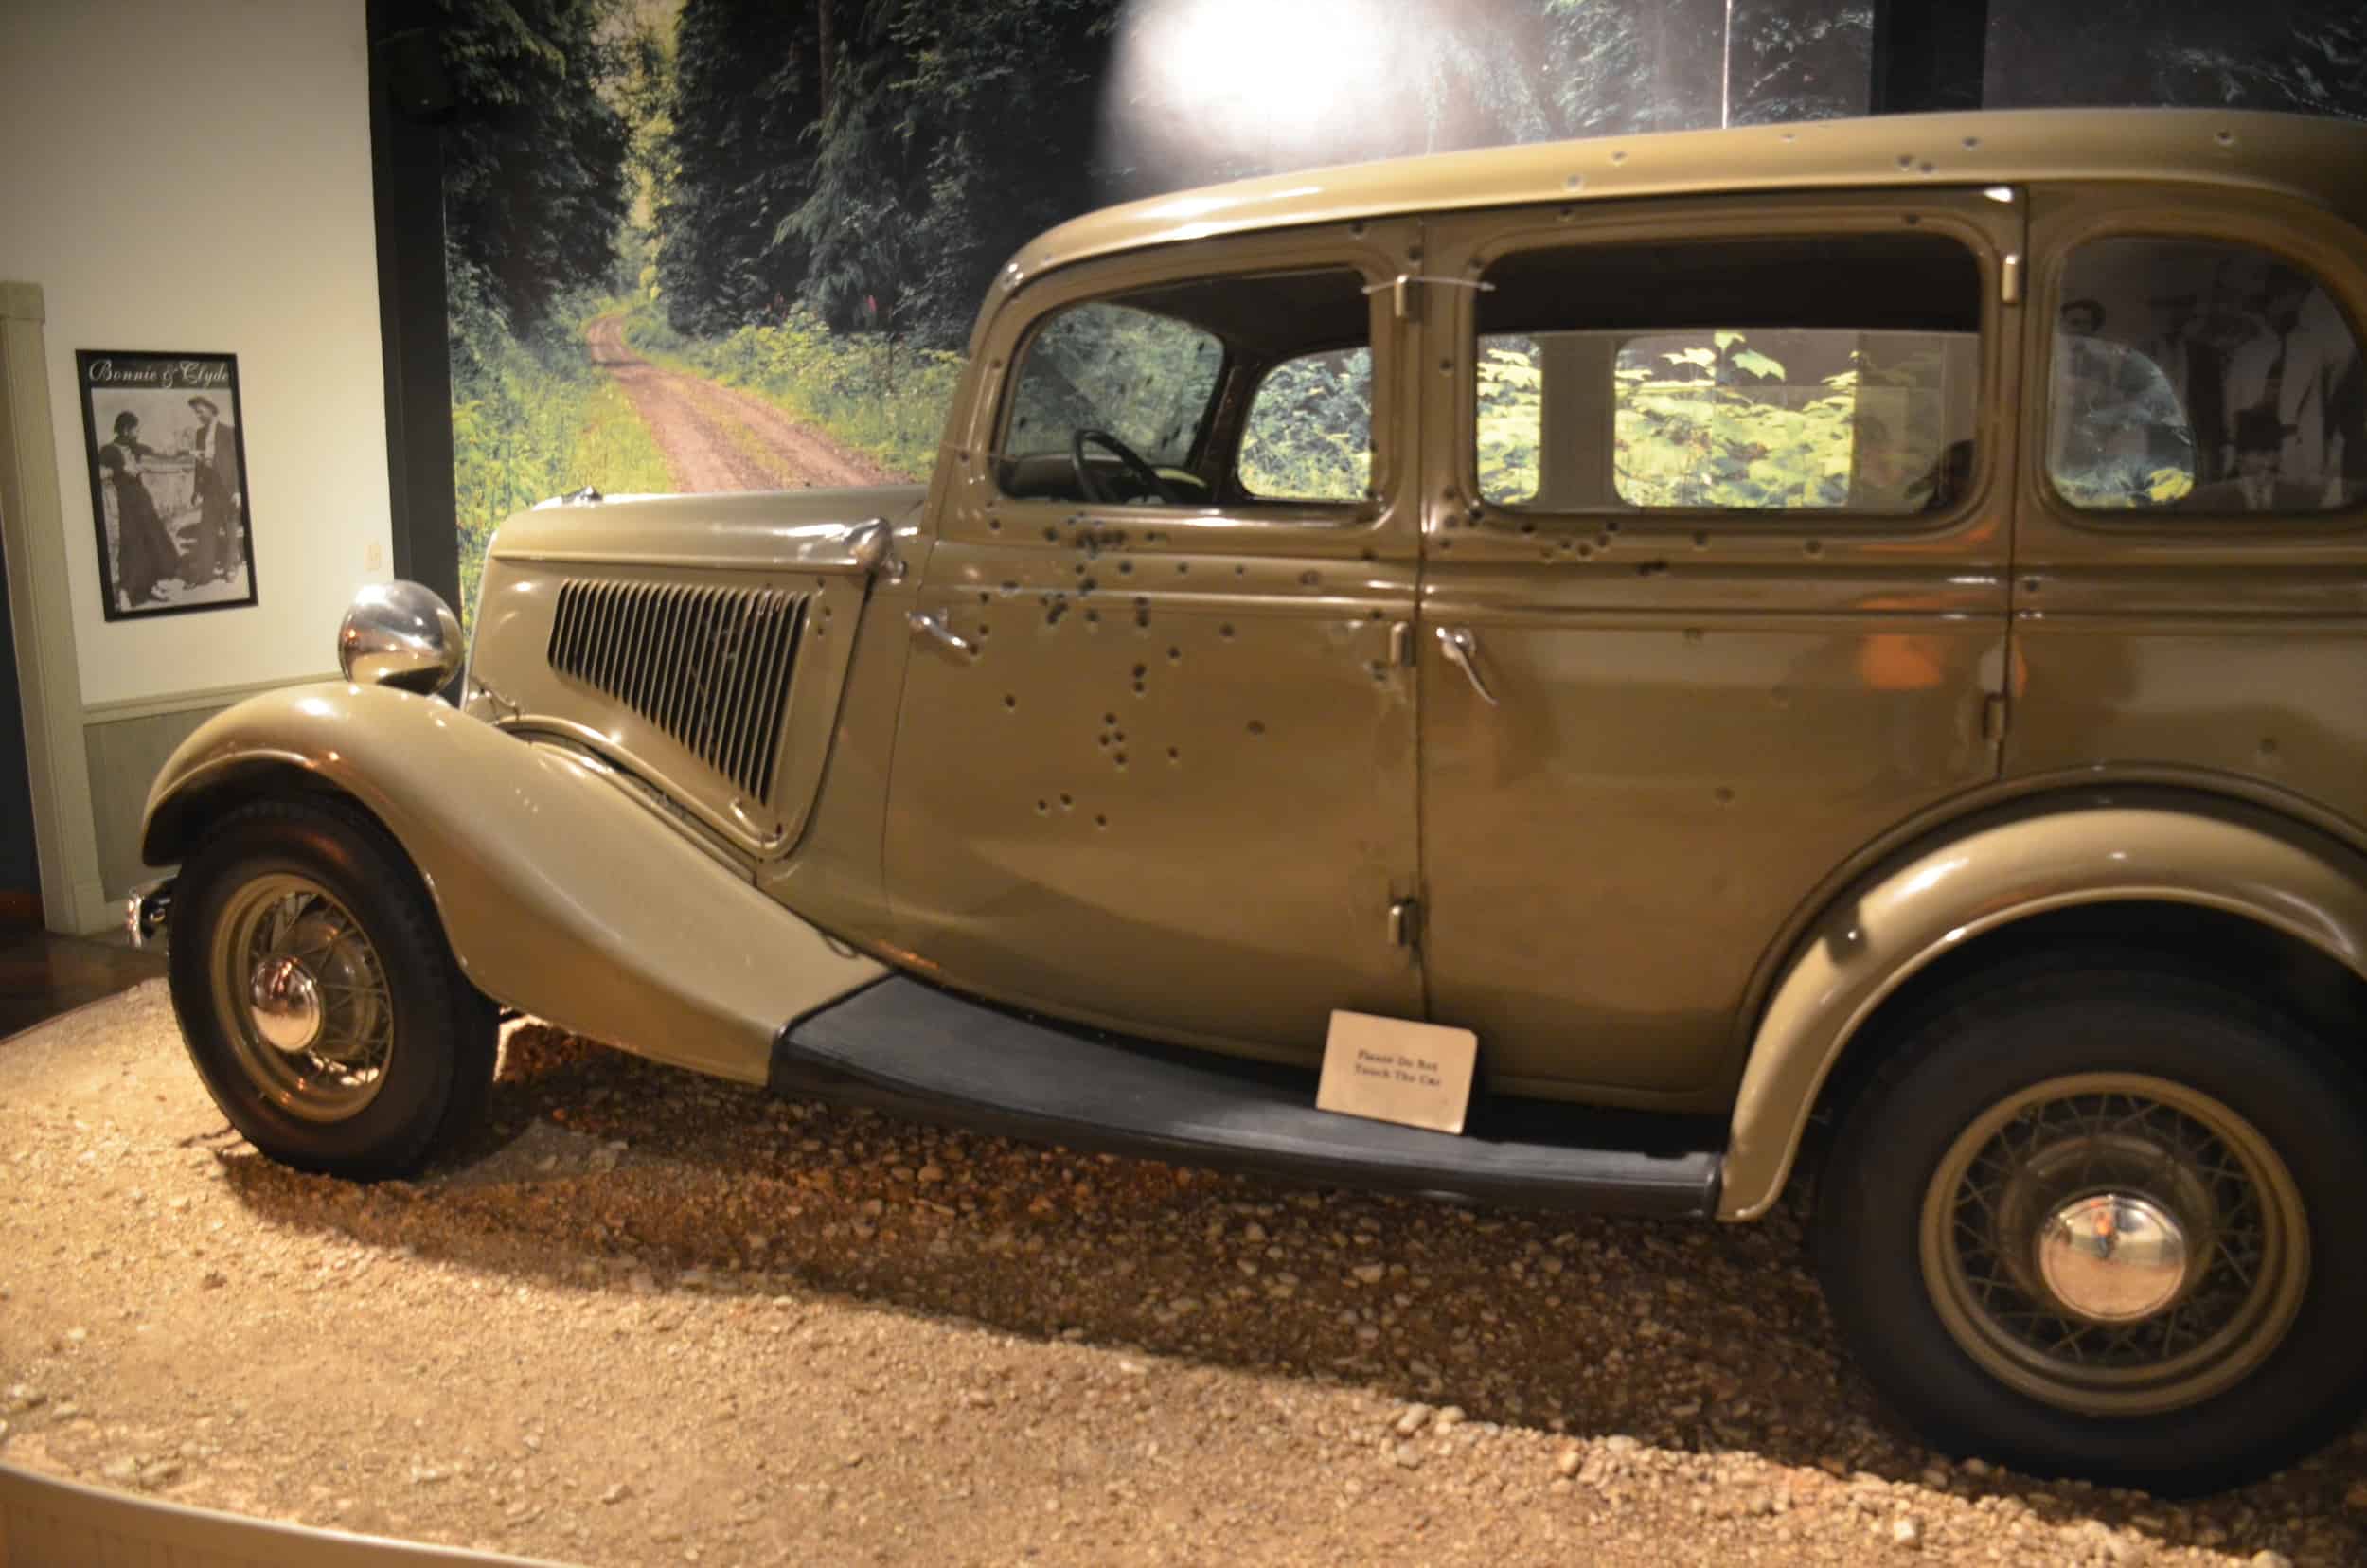 Bonnie and Clyde car at the Texas Ranger Museum in San Antonio, Texas